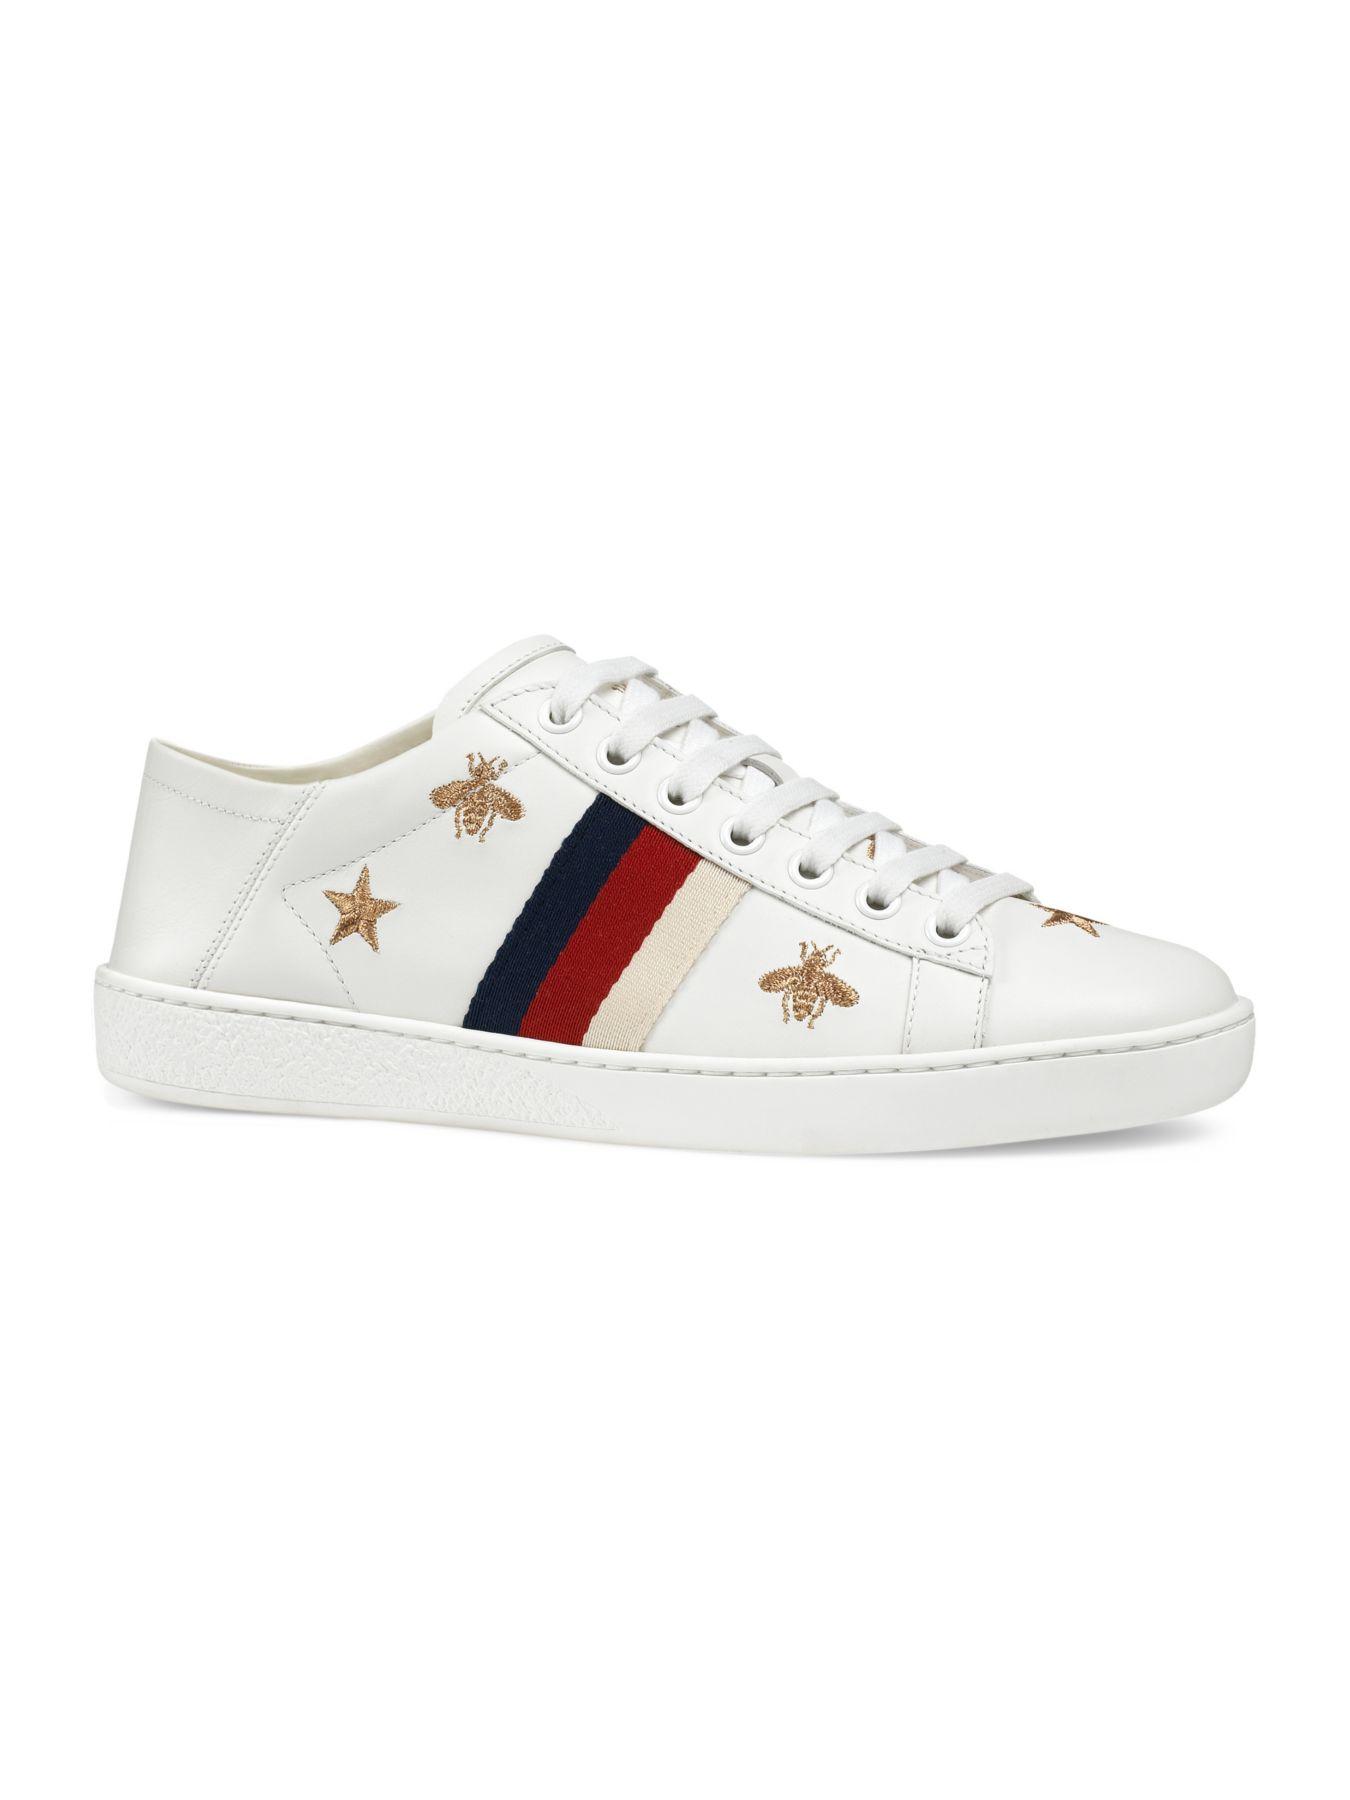 Gucci Leather New Ace Sneakers With Bees And Stars in White - Lyst